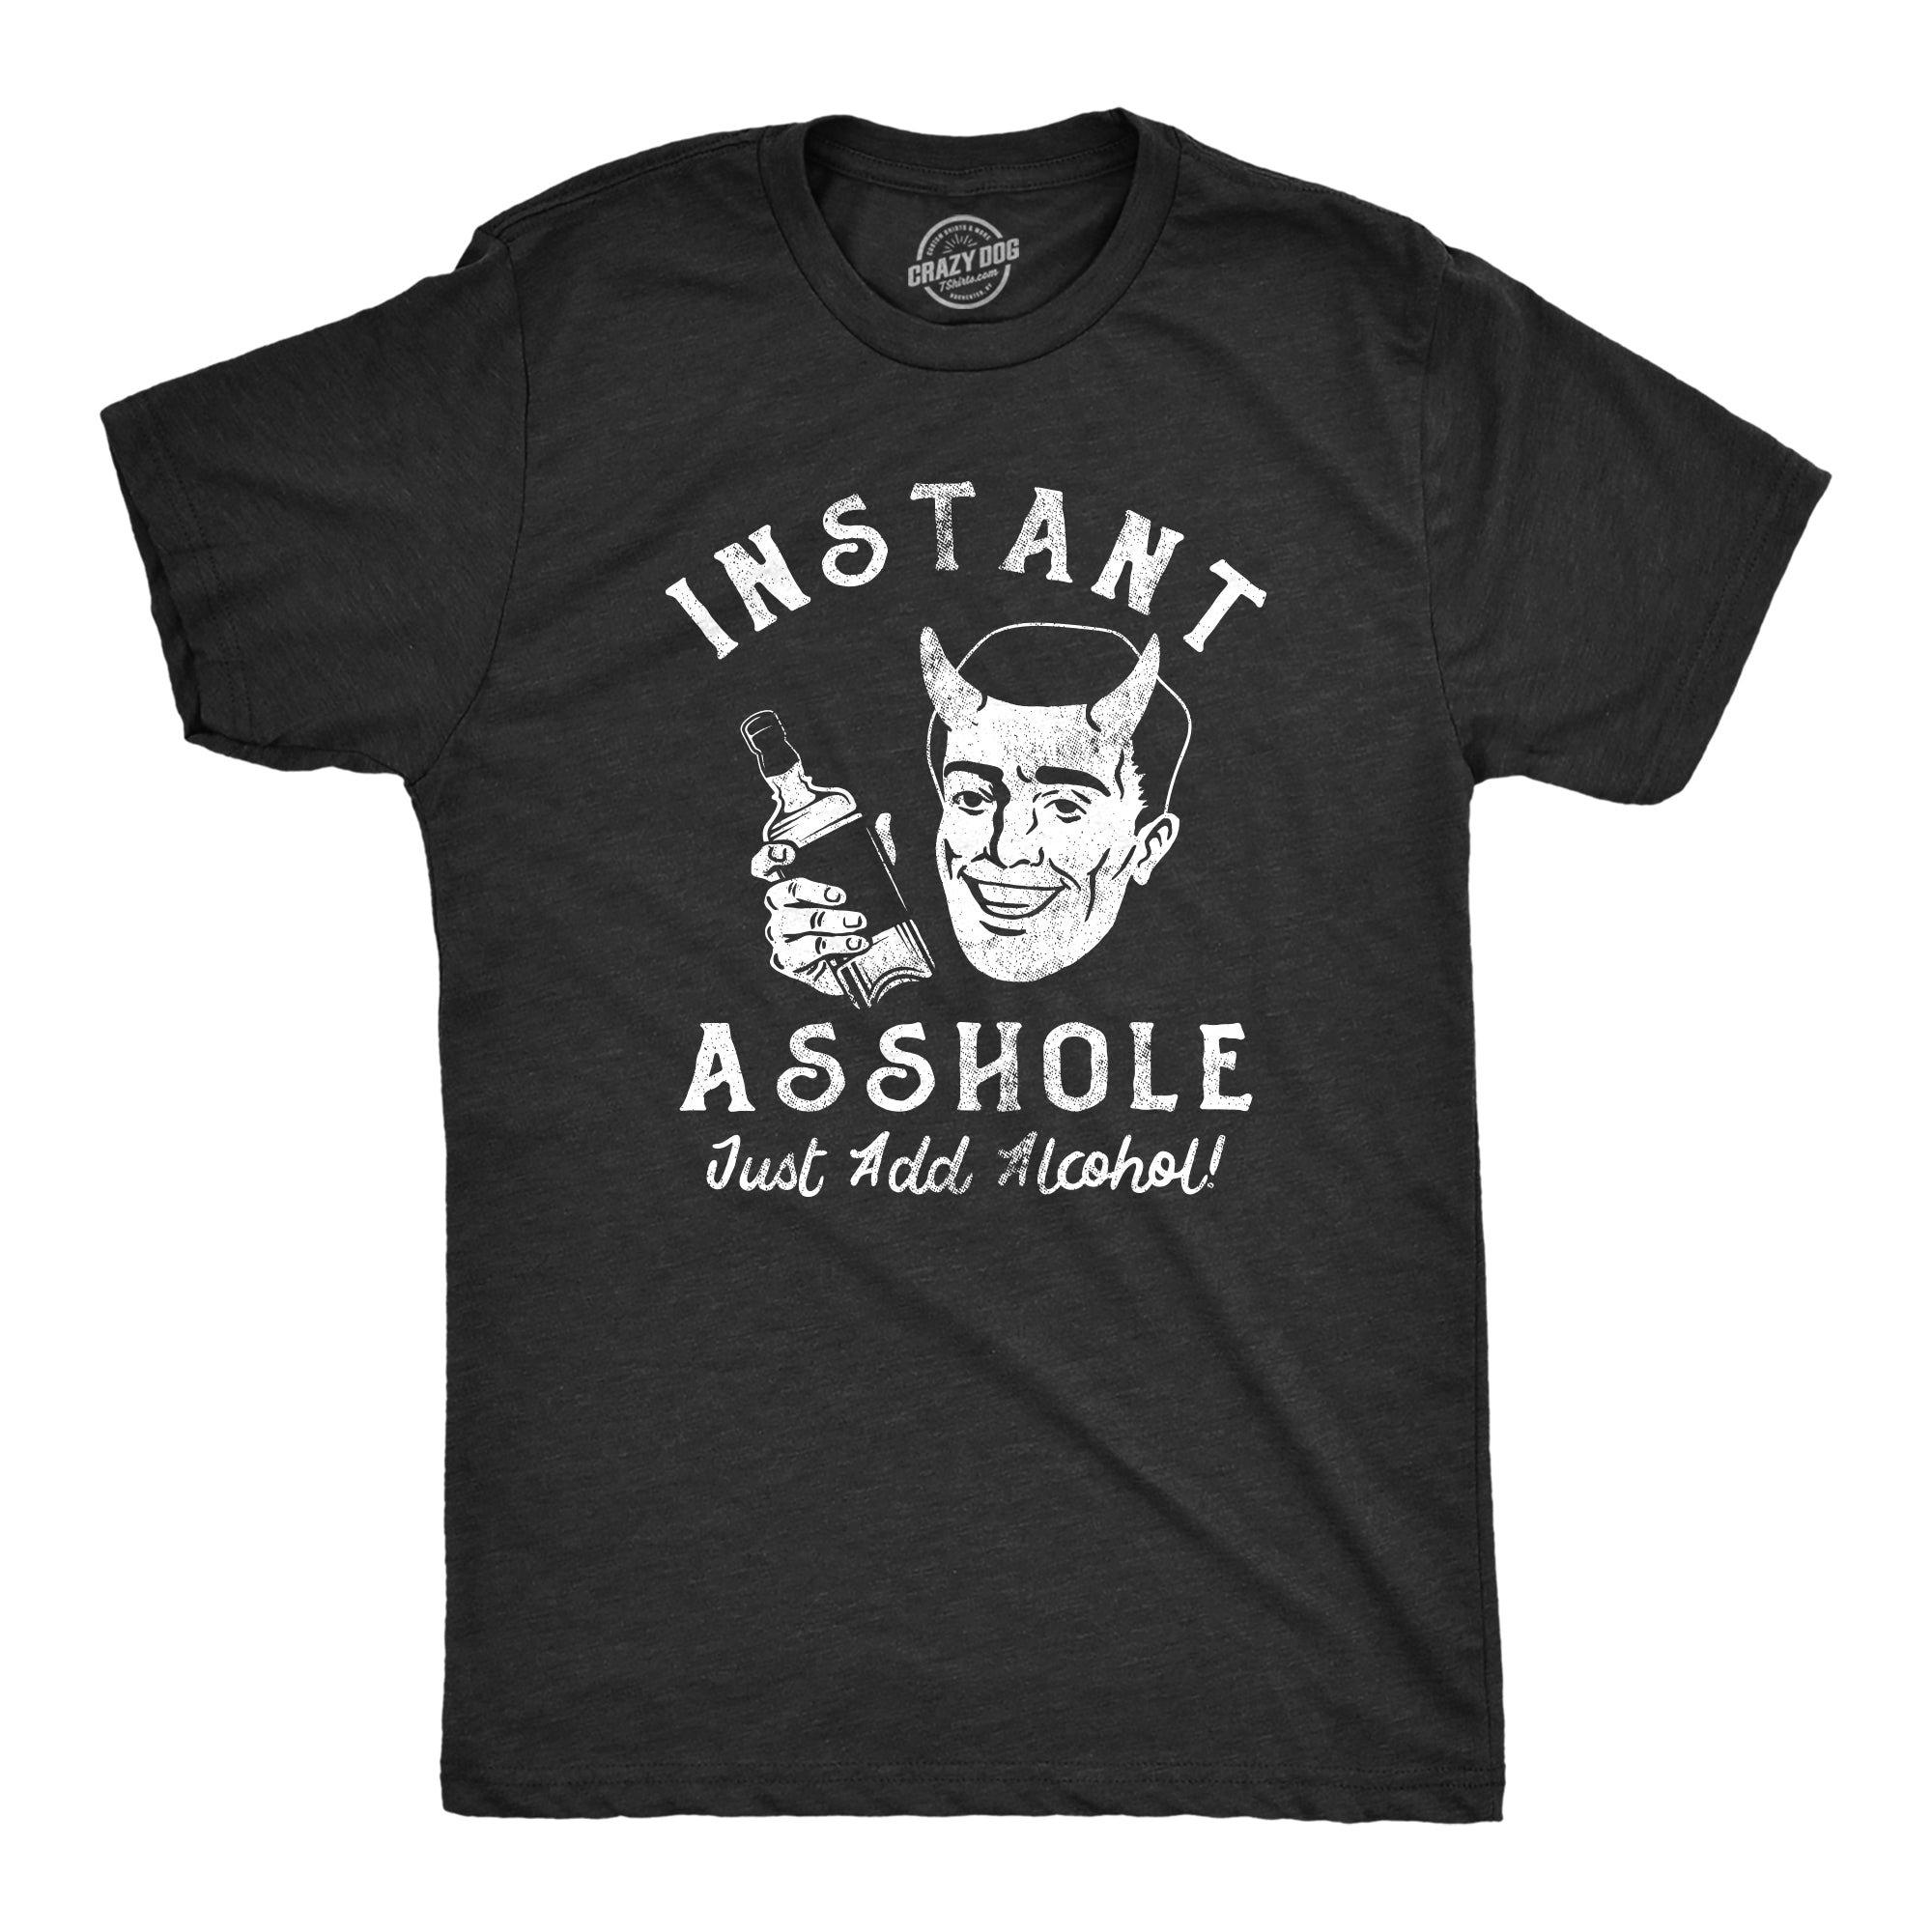 Funny Heather Black - ASSHOLE Instant Asshole Just Add Alcohol Mens T Shirt Nerdy Drinking Sarcastic Tee